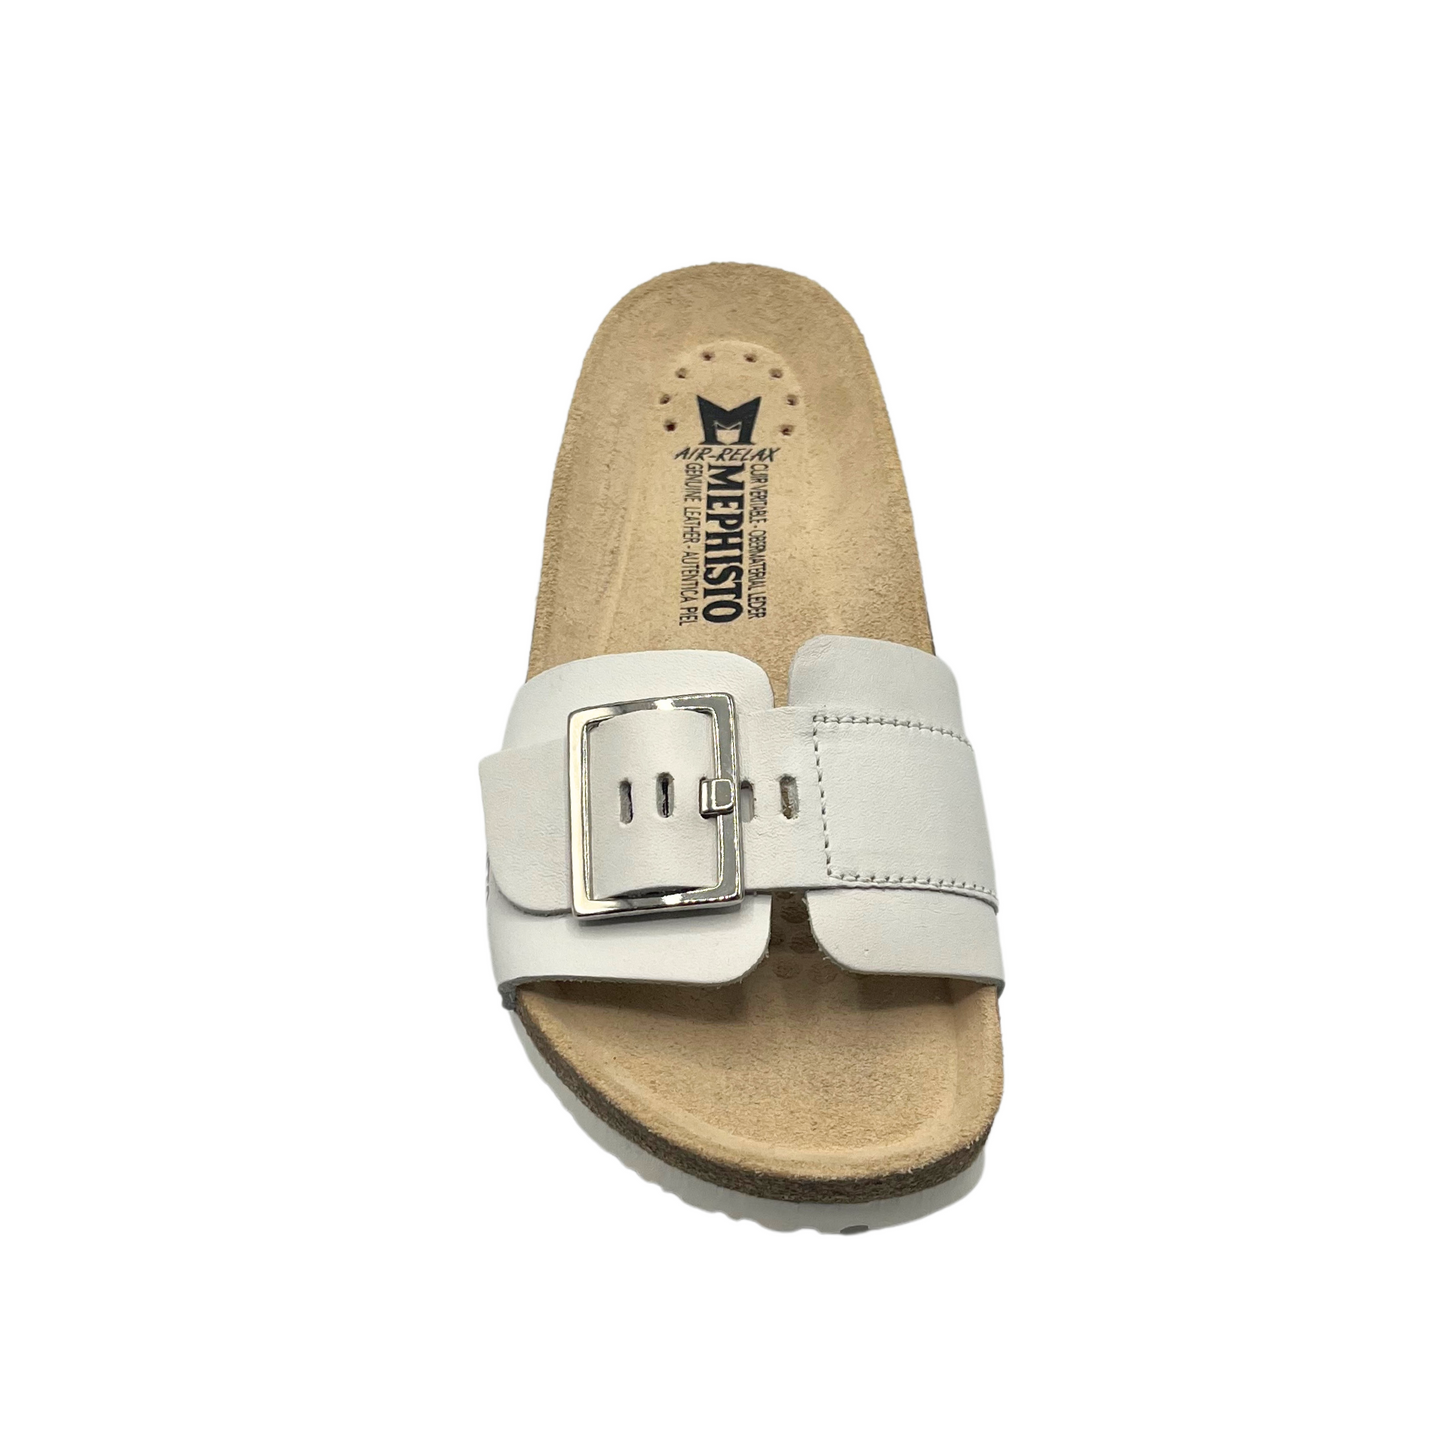 Top down view of a white leather mule with adjustable buckle.  Leather/cork footbed with great arch support and cozy heel cup